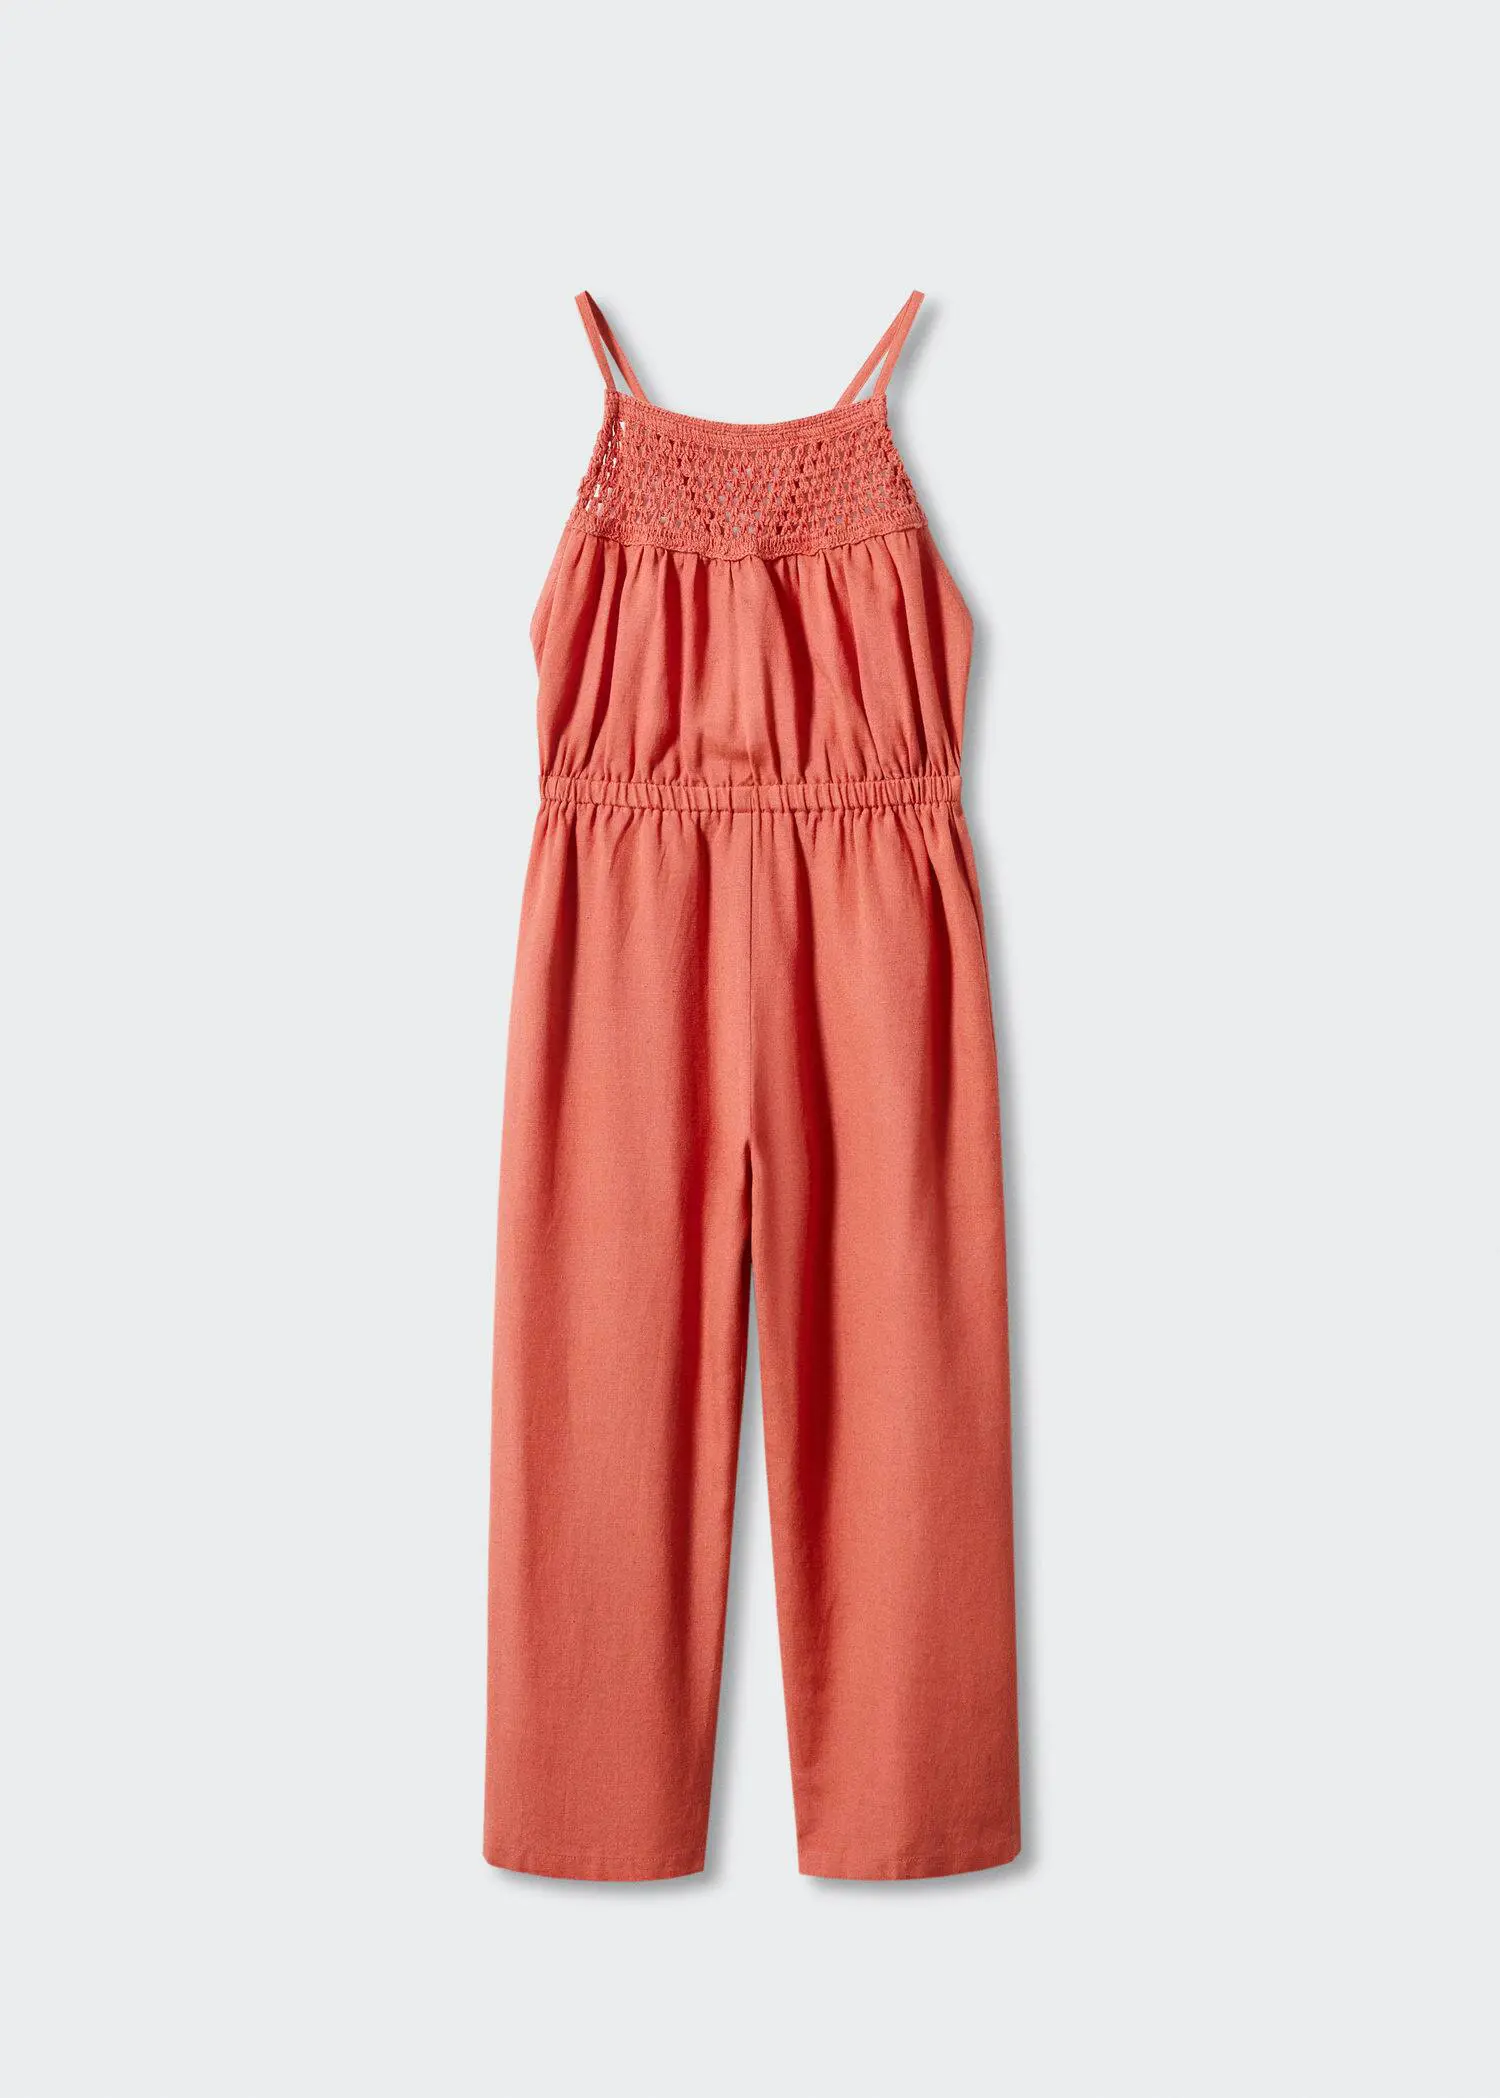 Mango Jumpsuit with crochet detail. a coral colored jumpsuit with spaghetti straps and an elastic waist. 